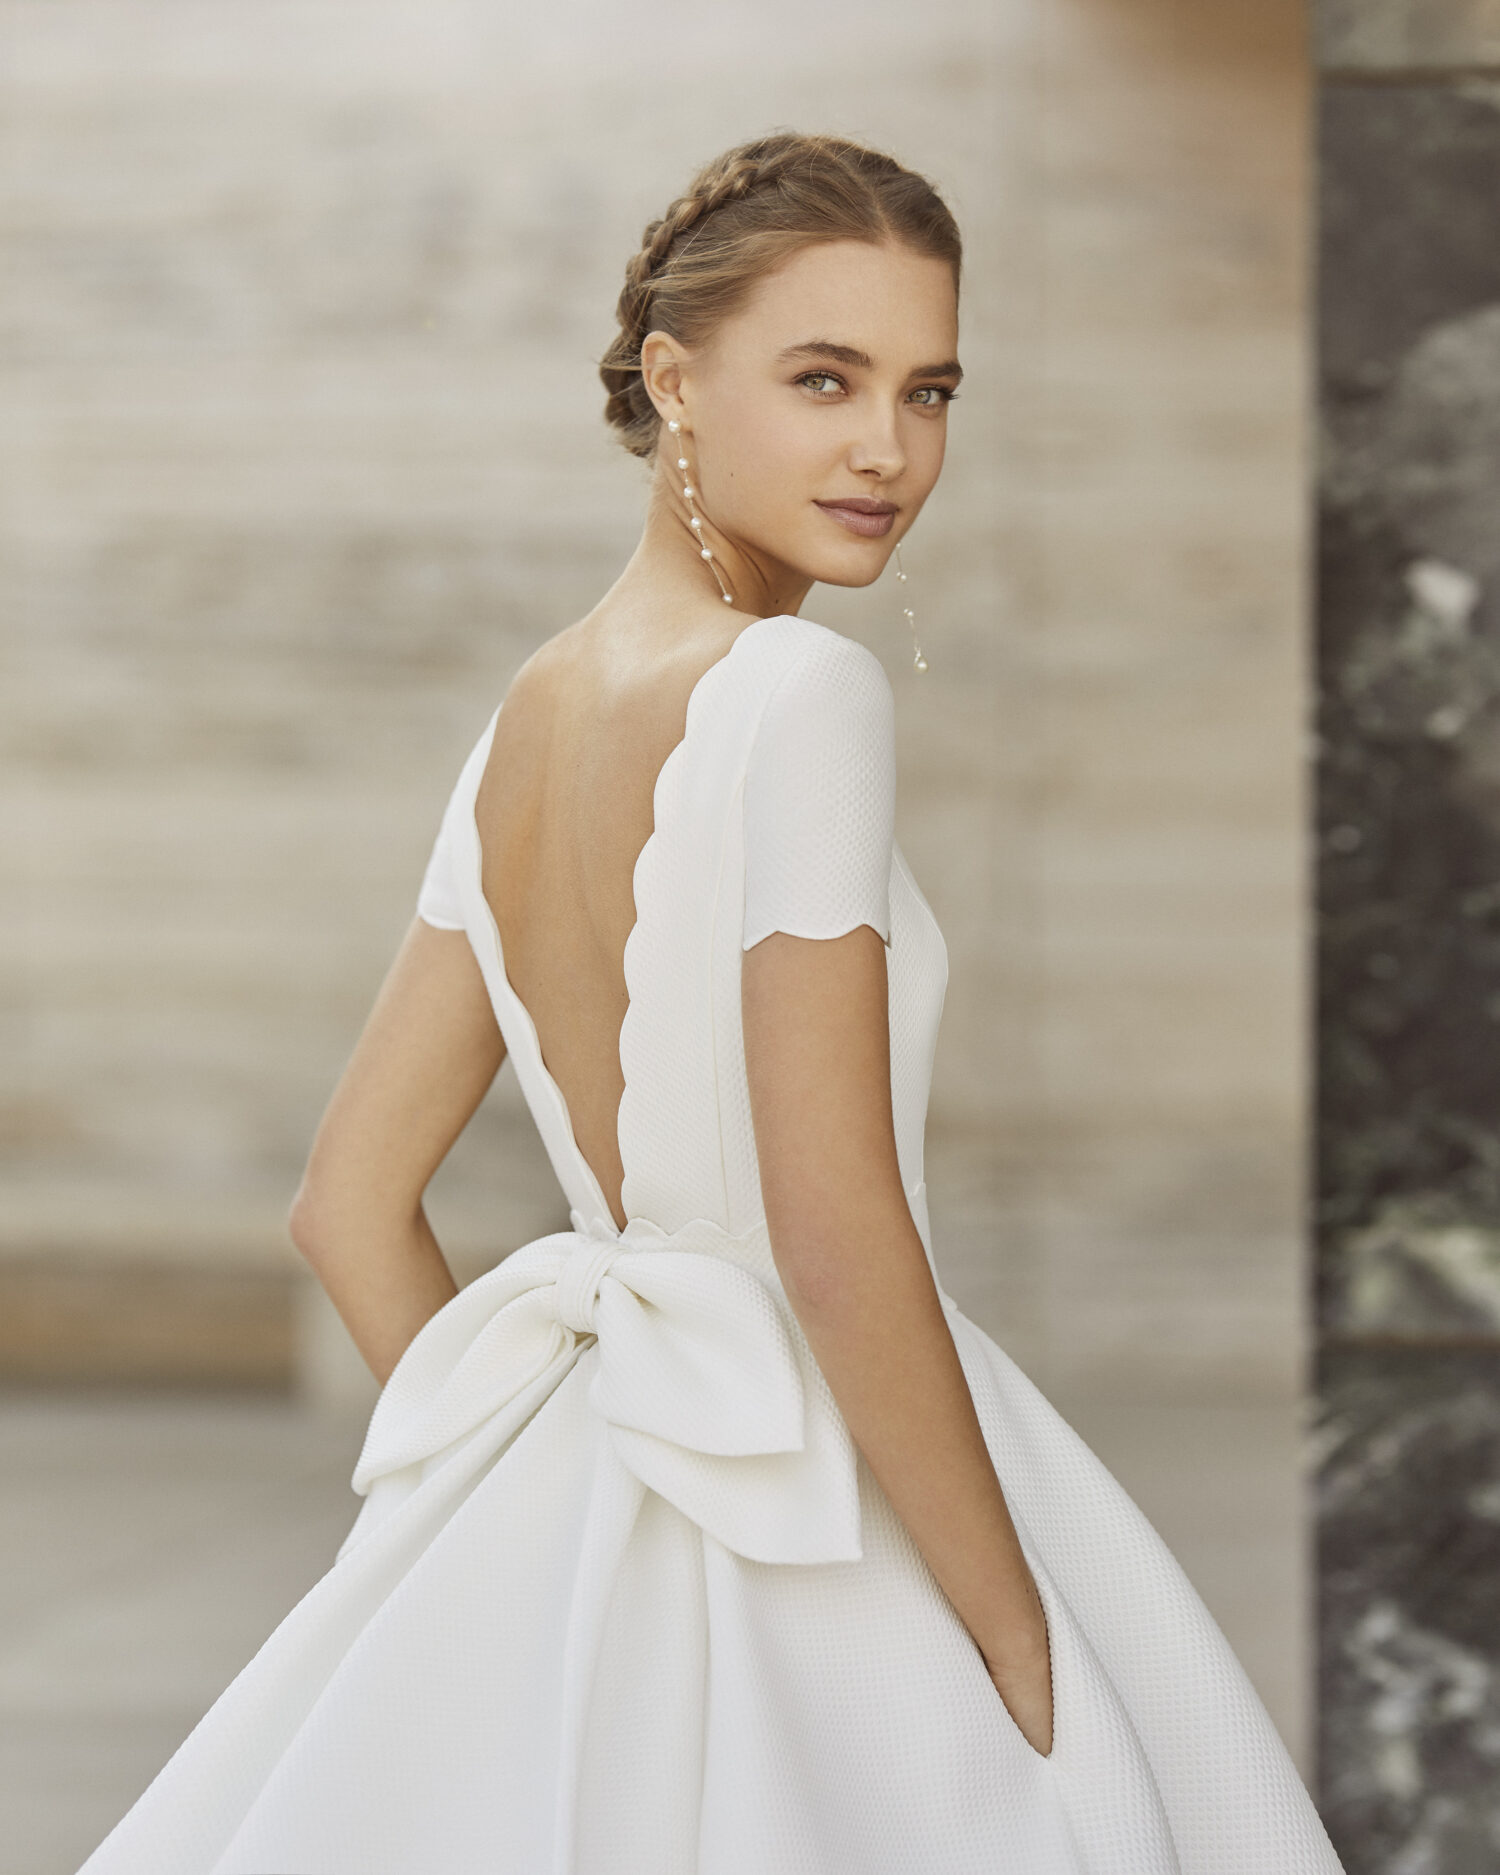 Muildier mezelf schudden 25 years of Rosa Clara magic. Spanish bridal brand in the picture